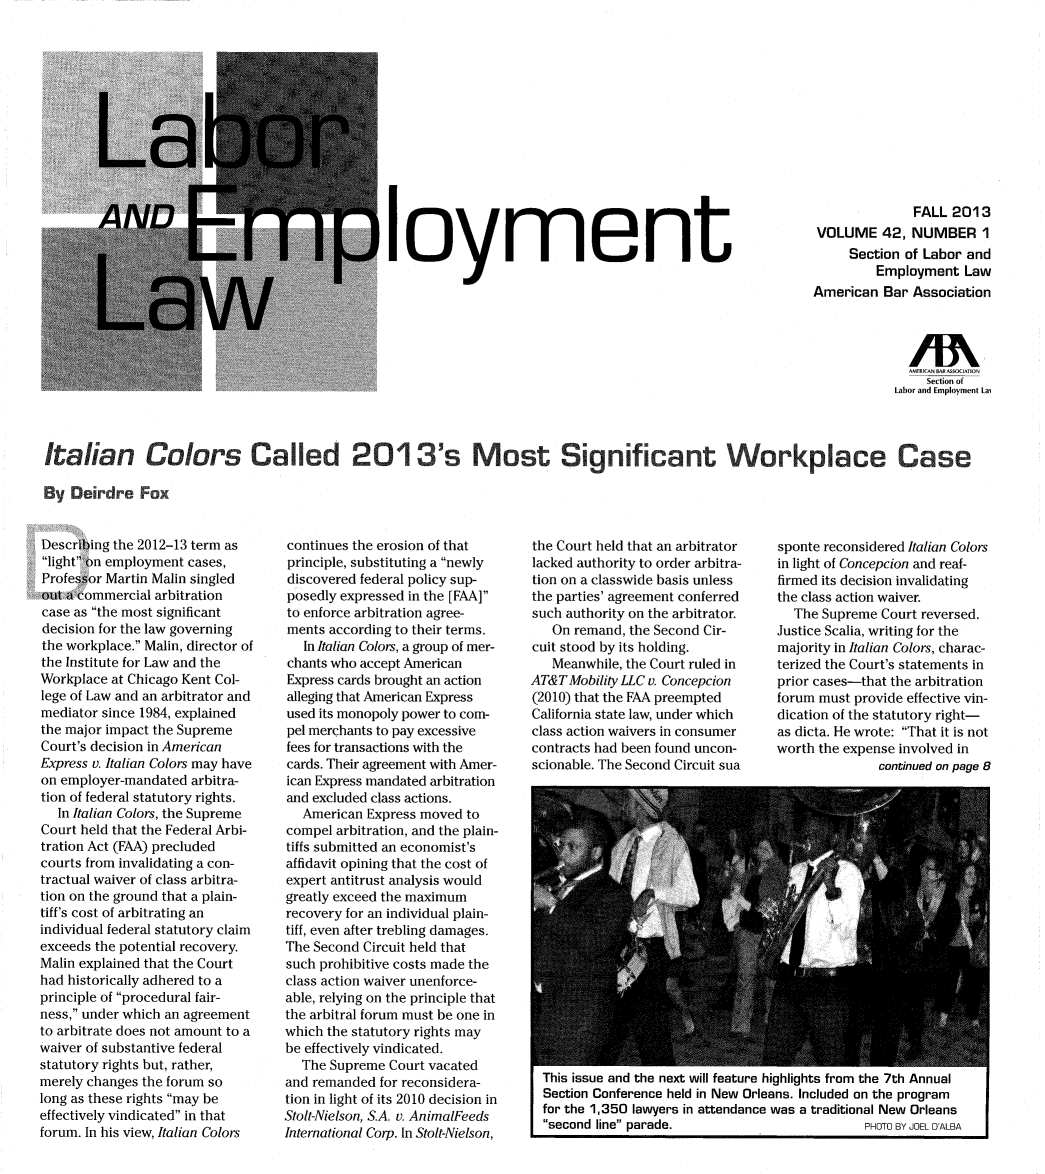 handle is hein.journals/laboemplo42 and id is 1 raw text is: loymentFALL 2013VOLUME 42, NUMBER 1Section of Labor andEmployment LawAmerican Bar AssociationSection ofLabor and Employment LaiItalian Colors C        ed 2 1 3's Most Sgicant Workplace CaseBy eirdre FoxDescribing the 2012-13 term aslight on employment cases,Professor Martin Malin singledout a commercial arbitrationcase as the most significantdecision for the law governingthe workplace. Malin, director ofthe Institute for Law and theWorkplace at Chicago Kent Col-lege of Law and an arbitrator andmediator since 1984, explainedthe major impact the SupremeCourt's decision in AmericanExpress v. Italian Colors may haveon employer-mandated arbitra-tion of federal statutory rights.In Italian Colors, the SupremeCourt held that the Federal Arbi-tration Act (FAA) precludedcourts from invalidating a con-tractual waiver of class arbitra-tion on the ground that a plain-tiff's cost of arbitrating anindividual federal statutory claimexceeds the potential recovery.Malin explained that the Courthad historically adhered to aprinciple of procedural fair-ness, under which an agreementto arbitrate does not amount to awaiver of substantive federalstatutory rights but, rather,merely changes the forum solong as these rights may beeffectively vindicated in thatforum. In his view, Italian Colorscontinues the erosion of thatprinciple, substituting a newlydiscovered federal policy sup-posedly expressed in the [FAA]to enforce arbitration agree-ments according to their terms.In Italian Colors, a group of mer-chants who accept AmericanExpress cards brought an actionalleging that American Expressused its monopoly power to com-pel merchants to pay excessivefees for transactions with thecards. Their agreement with Amer-ican Express mandated arbitrationand excluded class actions.American Express moved tocompel arbitration, and the plain-tiffs submitted an economist'saffidavit opining that the cost ofexpert antitrust analysis wouldgreatly exceed the maximumrecovery for an individual plain-tiff, even after trebling damages.The Second Circuit held thatsuch prohibitive costs made theclass action waiver unenforce-able, relying on the principle thatthe arbitral forum must be one inwhich the statutory rights maybe effectively vindicated.The Supreme Court vacatedand remanded for reconsidera-tion in light of its 2010 decision inStolt-Nielson, S.A. v. AnimalFeedsInternational Corp. In Stolt-Nielson,the Court held that an arbitratorlacked authority to order arbitra-tion on a classwide basis unlessthe parties' agreement conferredsuch authority on the arbitrator.On remand, the Second Cir-cuit stood by its holding.Meanwhile, the Court ruled inAT&T Mobility LLC v. Concepcion(2010) that the FAA preemptedCalifornia state law, under whichclass action waivers in consumercontracts had been found uncon-scionable. The Second Circuit suasponte reconsidered Italian Colorsin light of Concepcion and reaf-firmed its decision invalidatingthe class action waiver.The Supreme Court reversed.Justice Scalia, writing for themajority in Italian Colors, charac-terized the Court's statements inprior cases-that the arbitrationforum must provide effective vin-dication of the statutory right-as dicta. He wrote: That it is notworth the expense involved incontinued on page 8This issue and the next will feature highlights from the 7th AnnualSection Conference held in New Orleans. Included on the programfor the 1,350 lawyers in attendance was a traditional New Orleanssecond line parade.                      PHOTO BY JOEL DALBA